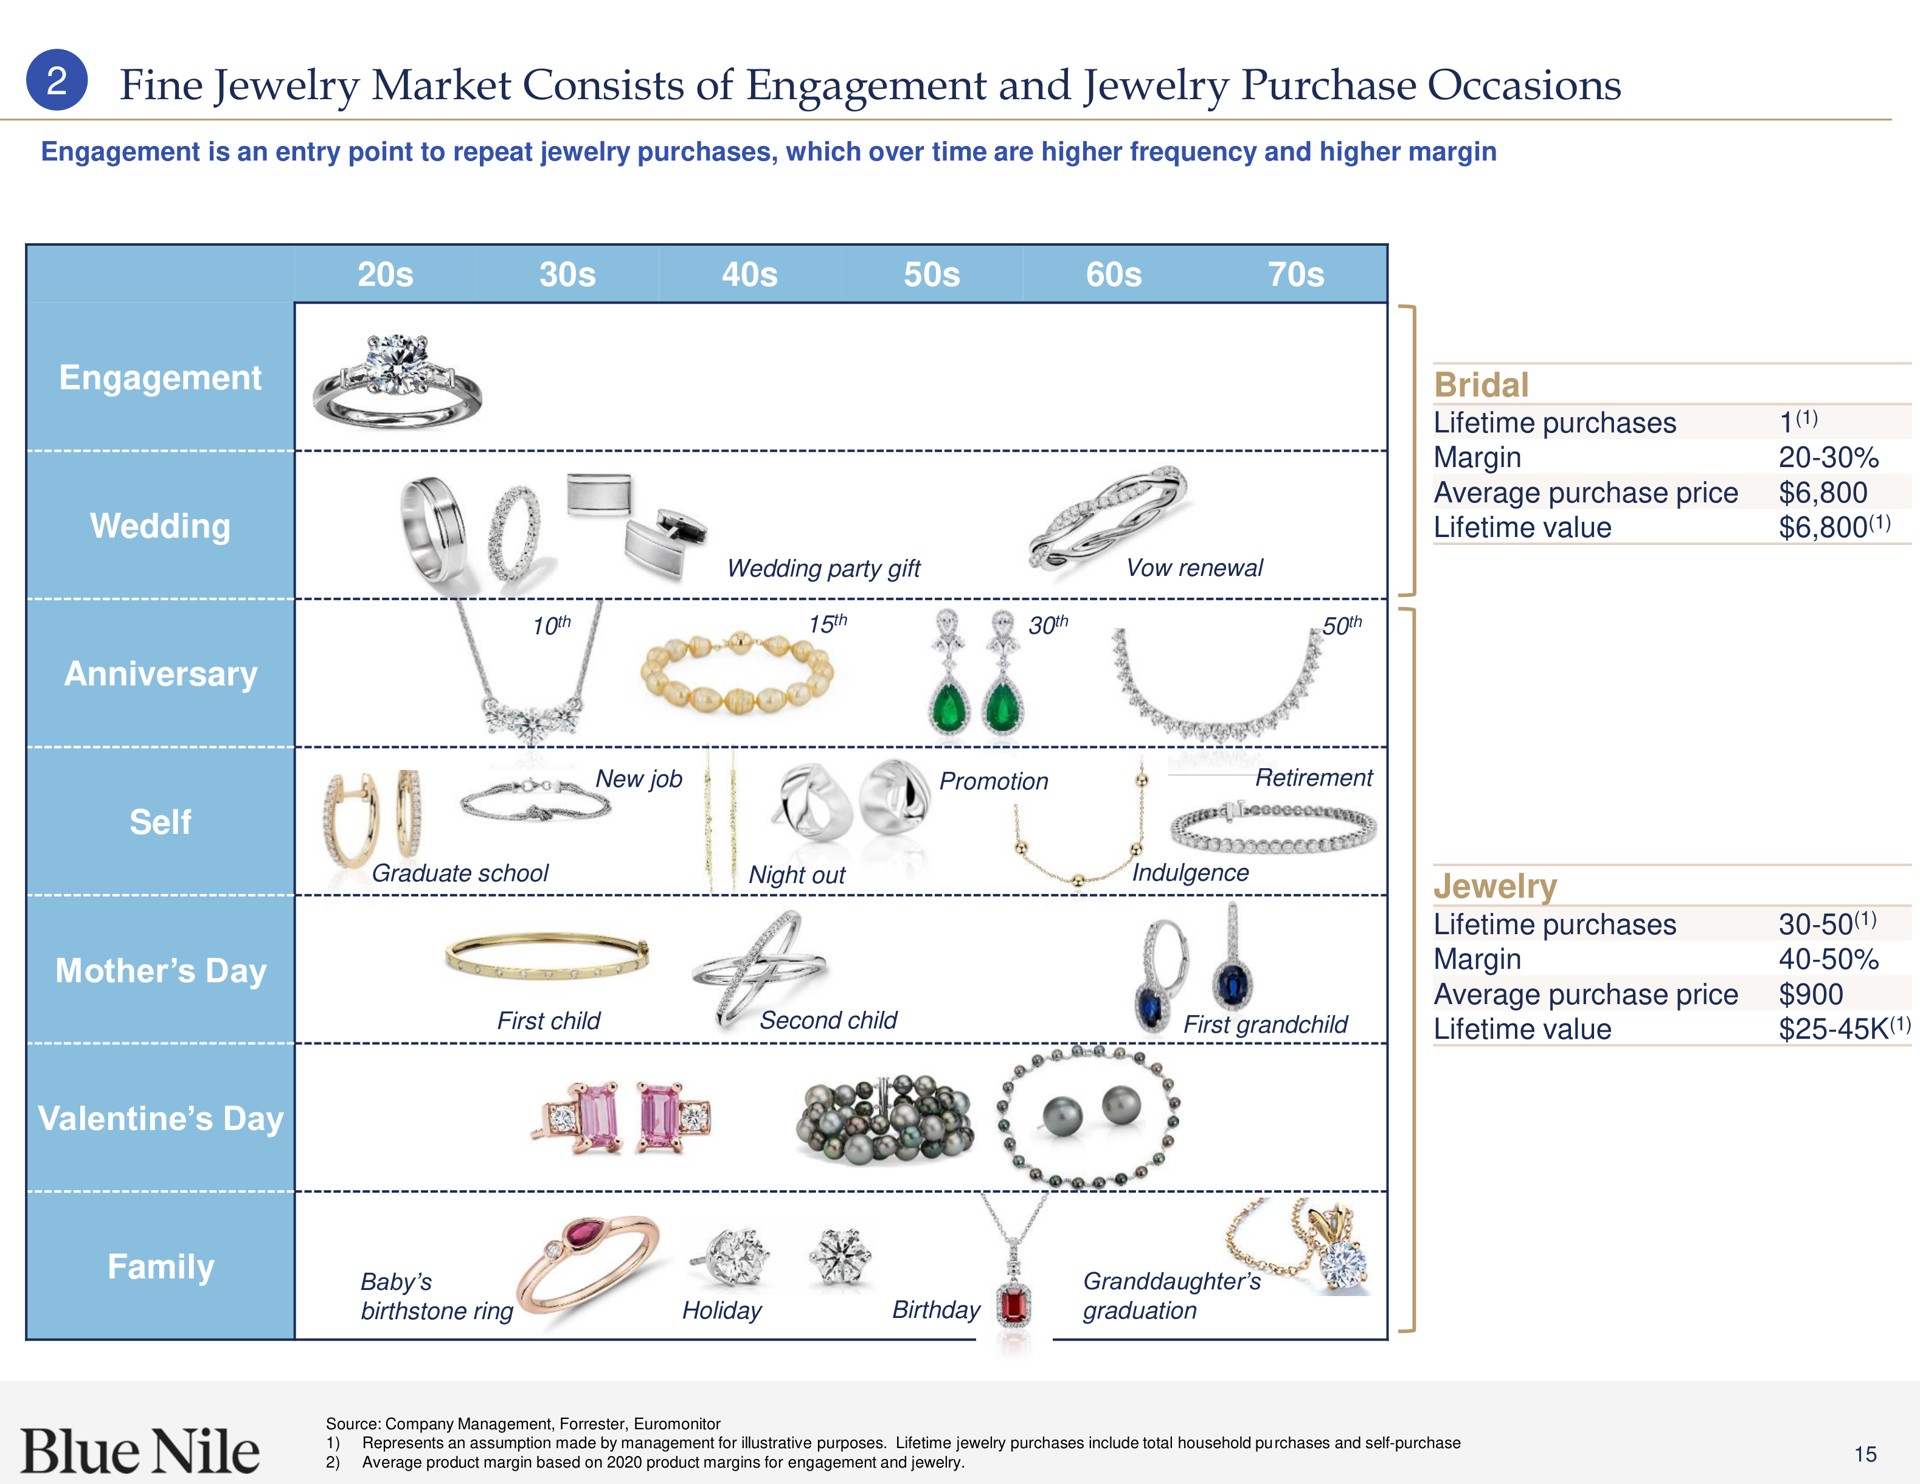 fine jewelry market consists of engagement and jewelry purchase occasions engagement wedding anniversary self mother day valentine day bridal jewelry family i a got | Blue Nile